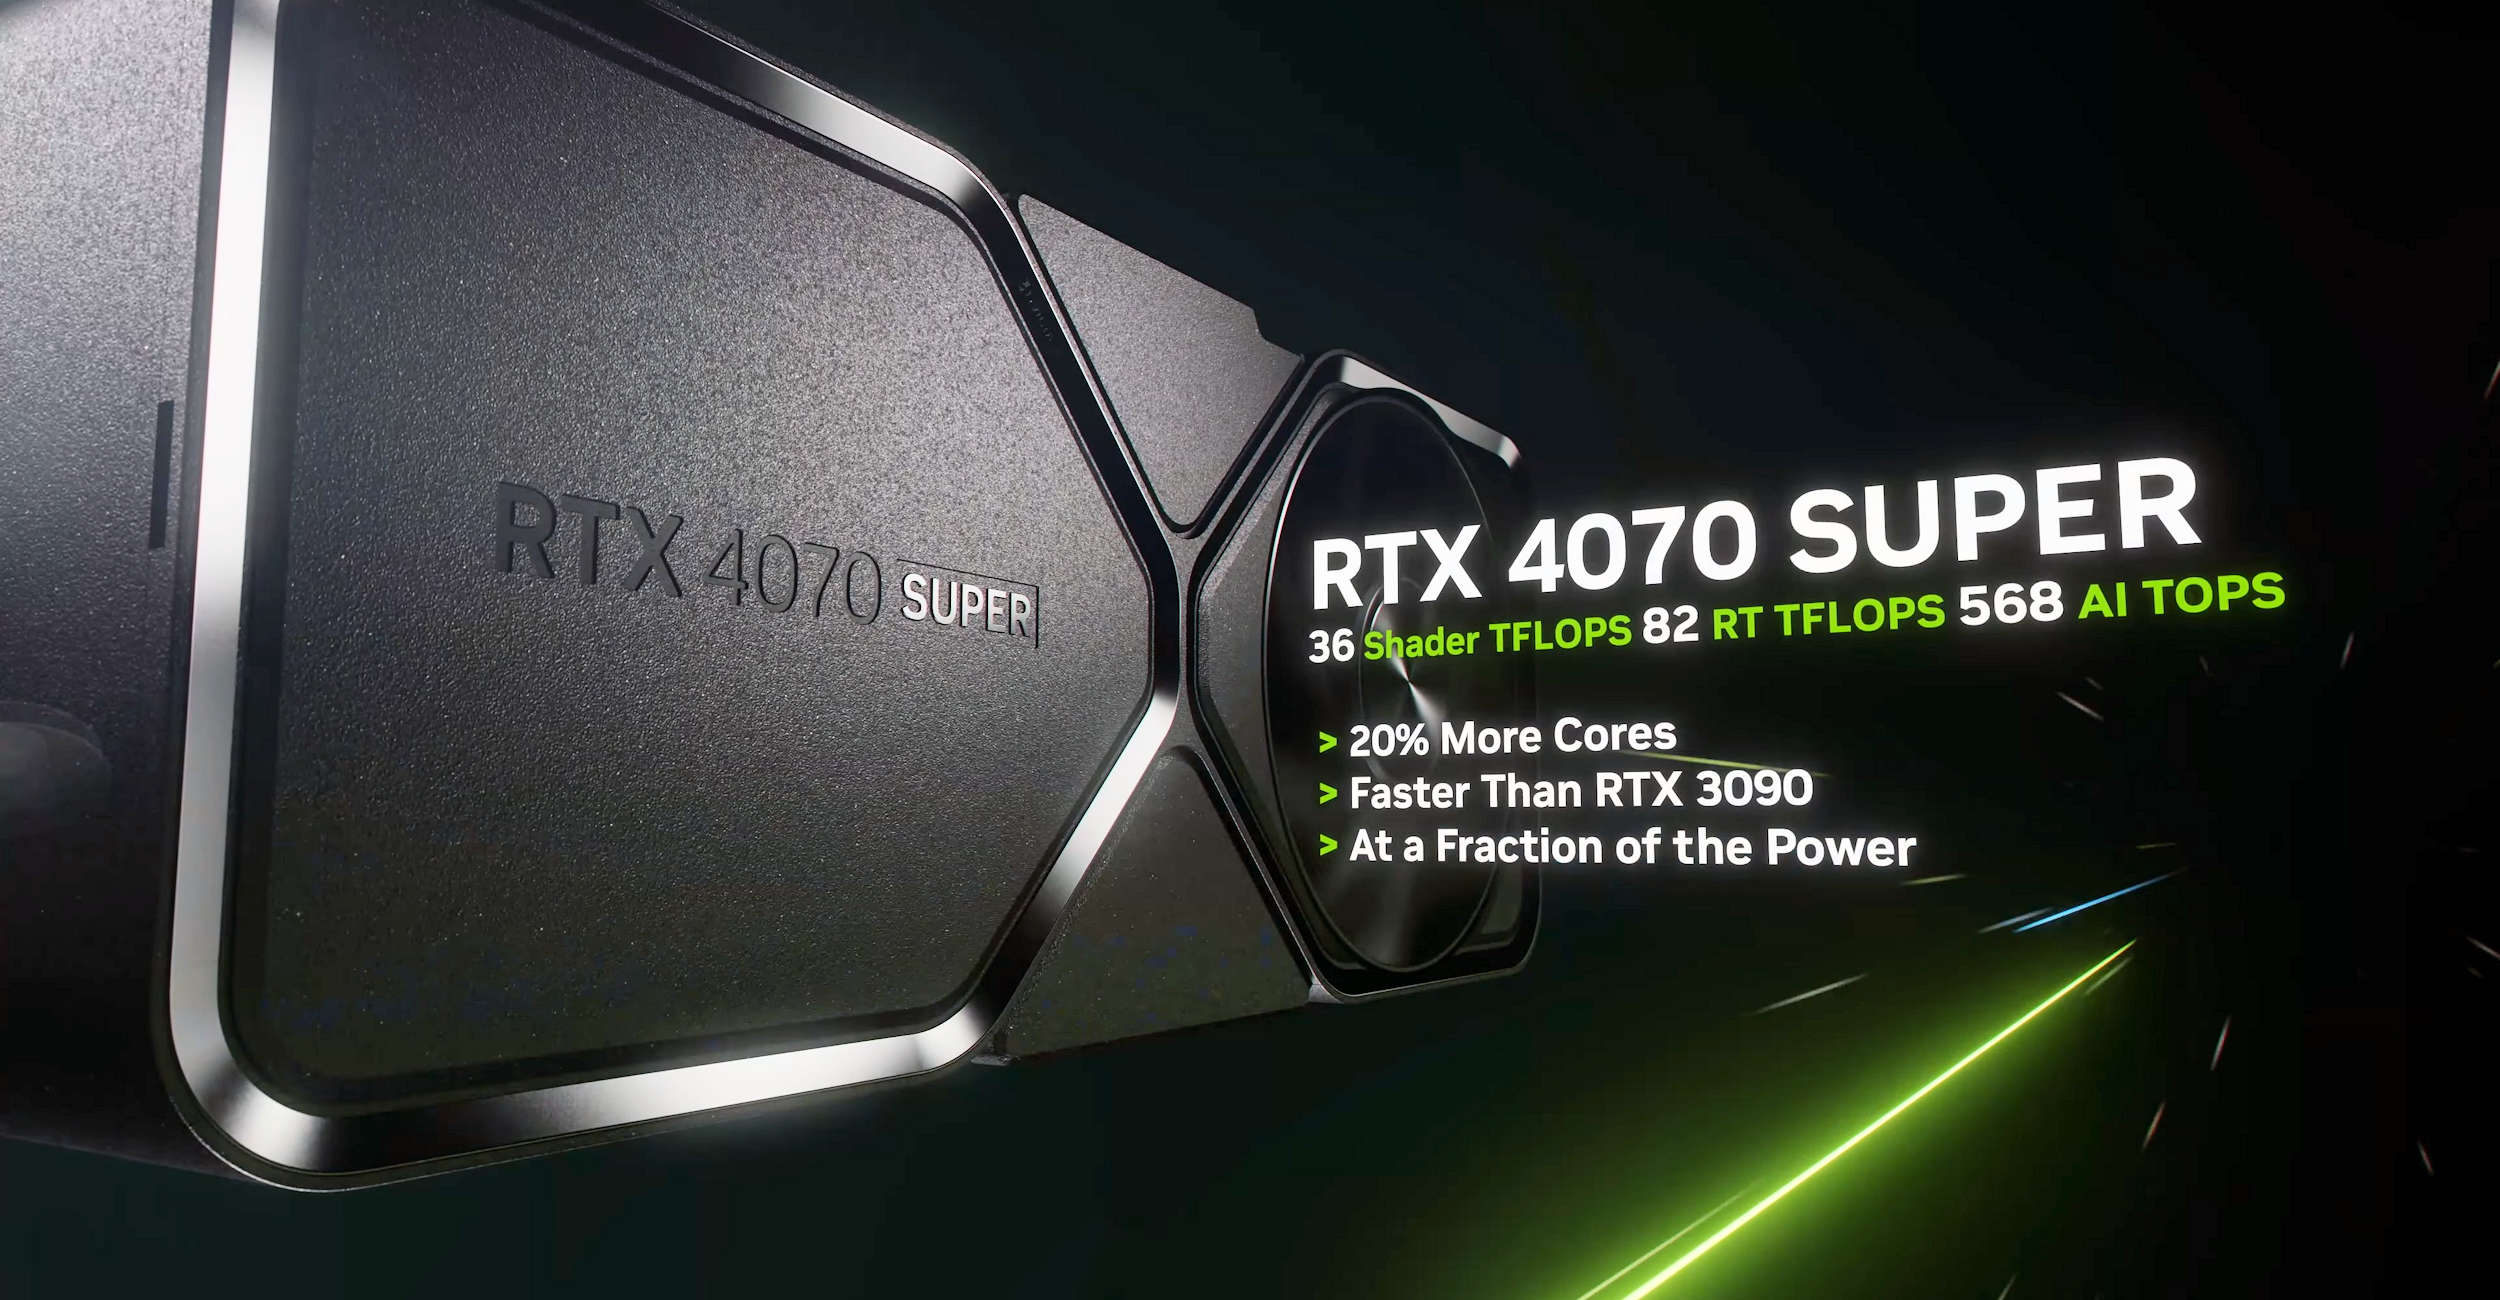 NVIDIA GeForce RTX 4070 SUPER Graphics Cards Review Roundup